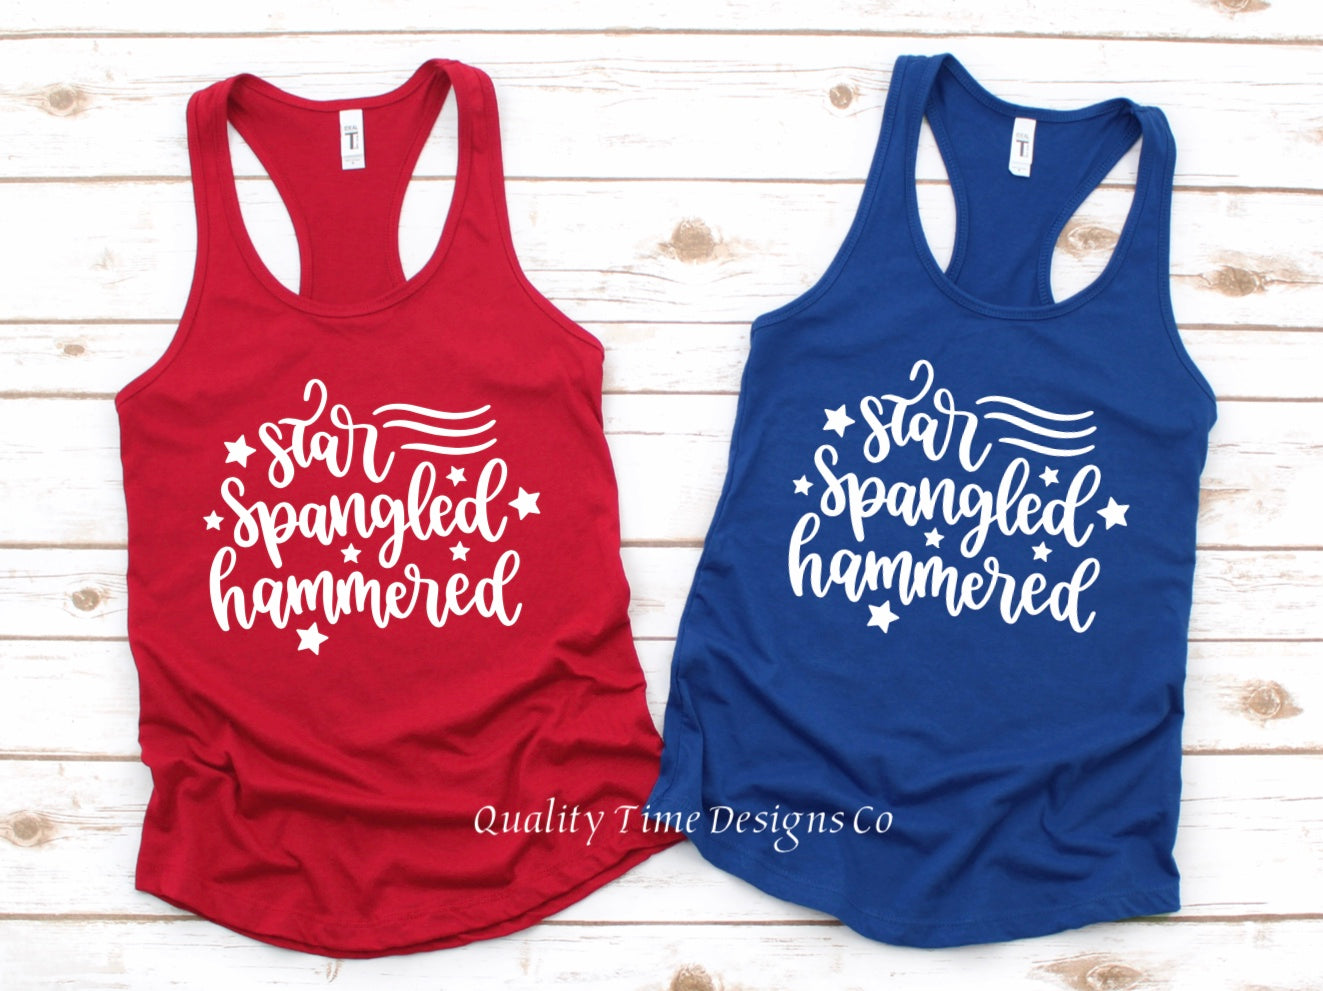 Star spangled hammered tank top